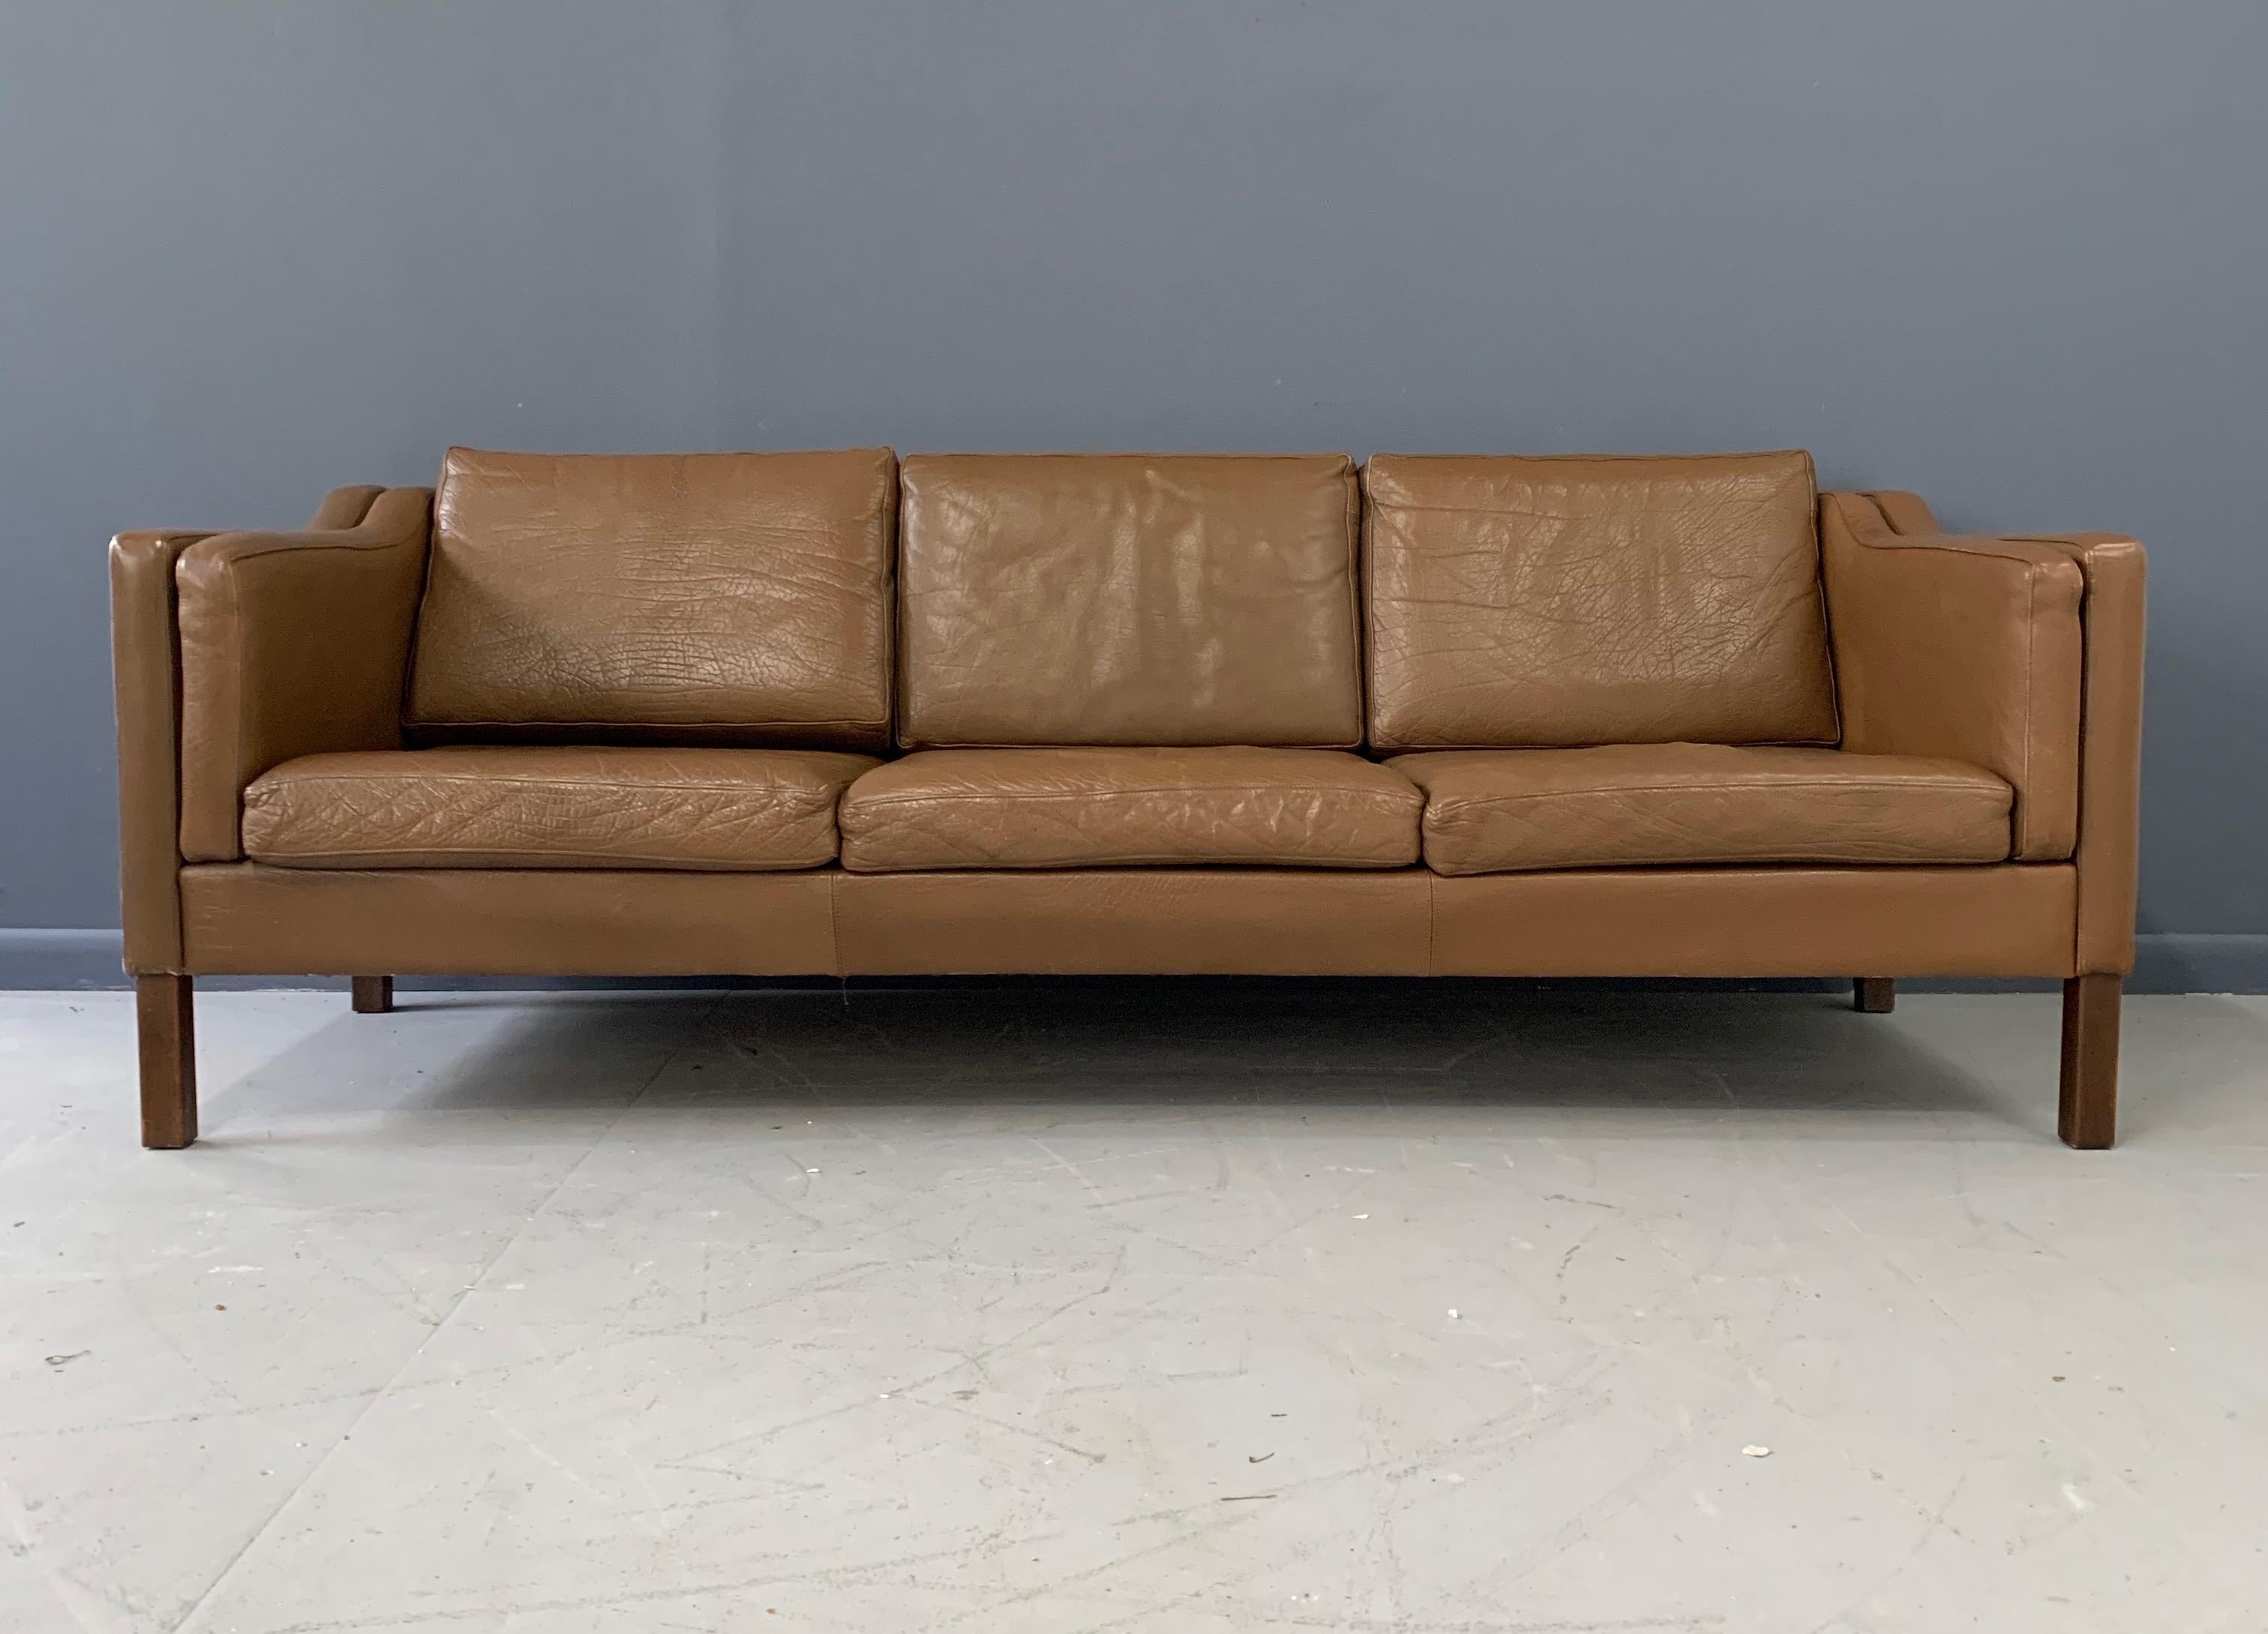 Børge Mogensen three-seat sofa with original brown leather upholstery. Legs of walnut Model 2213, made by Fredericia Furniture.